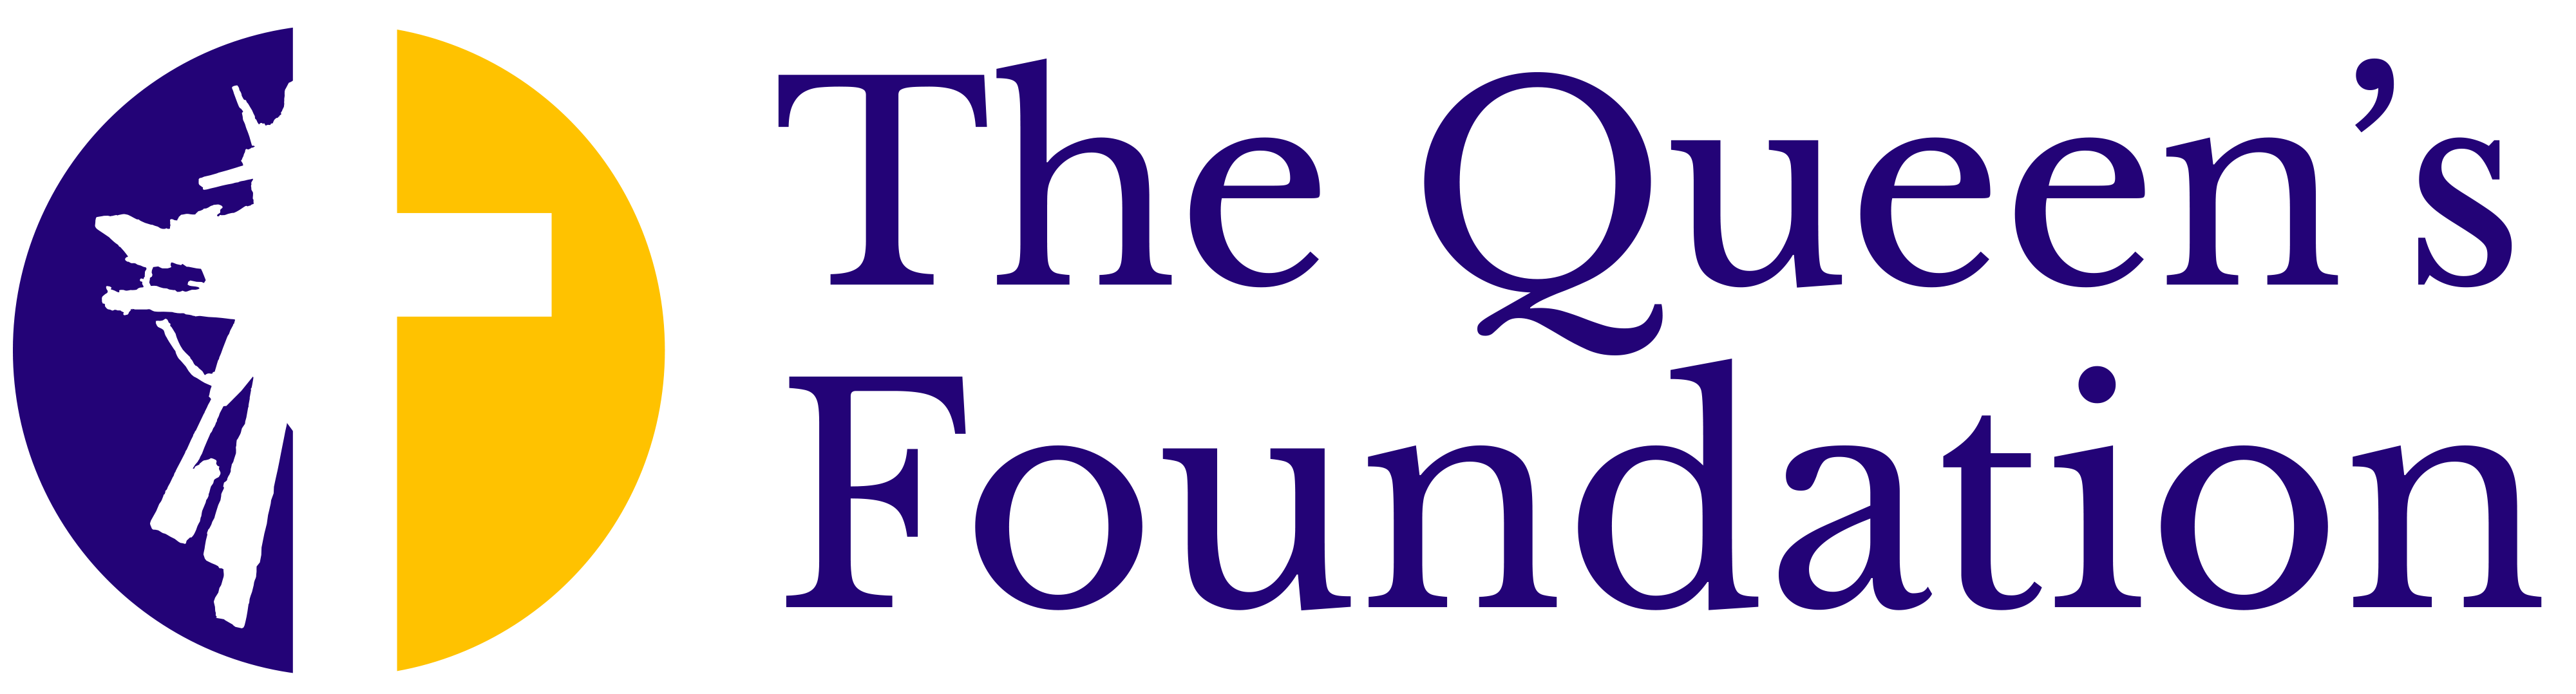 The Queen's Foundation Logo